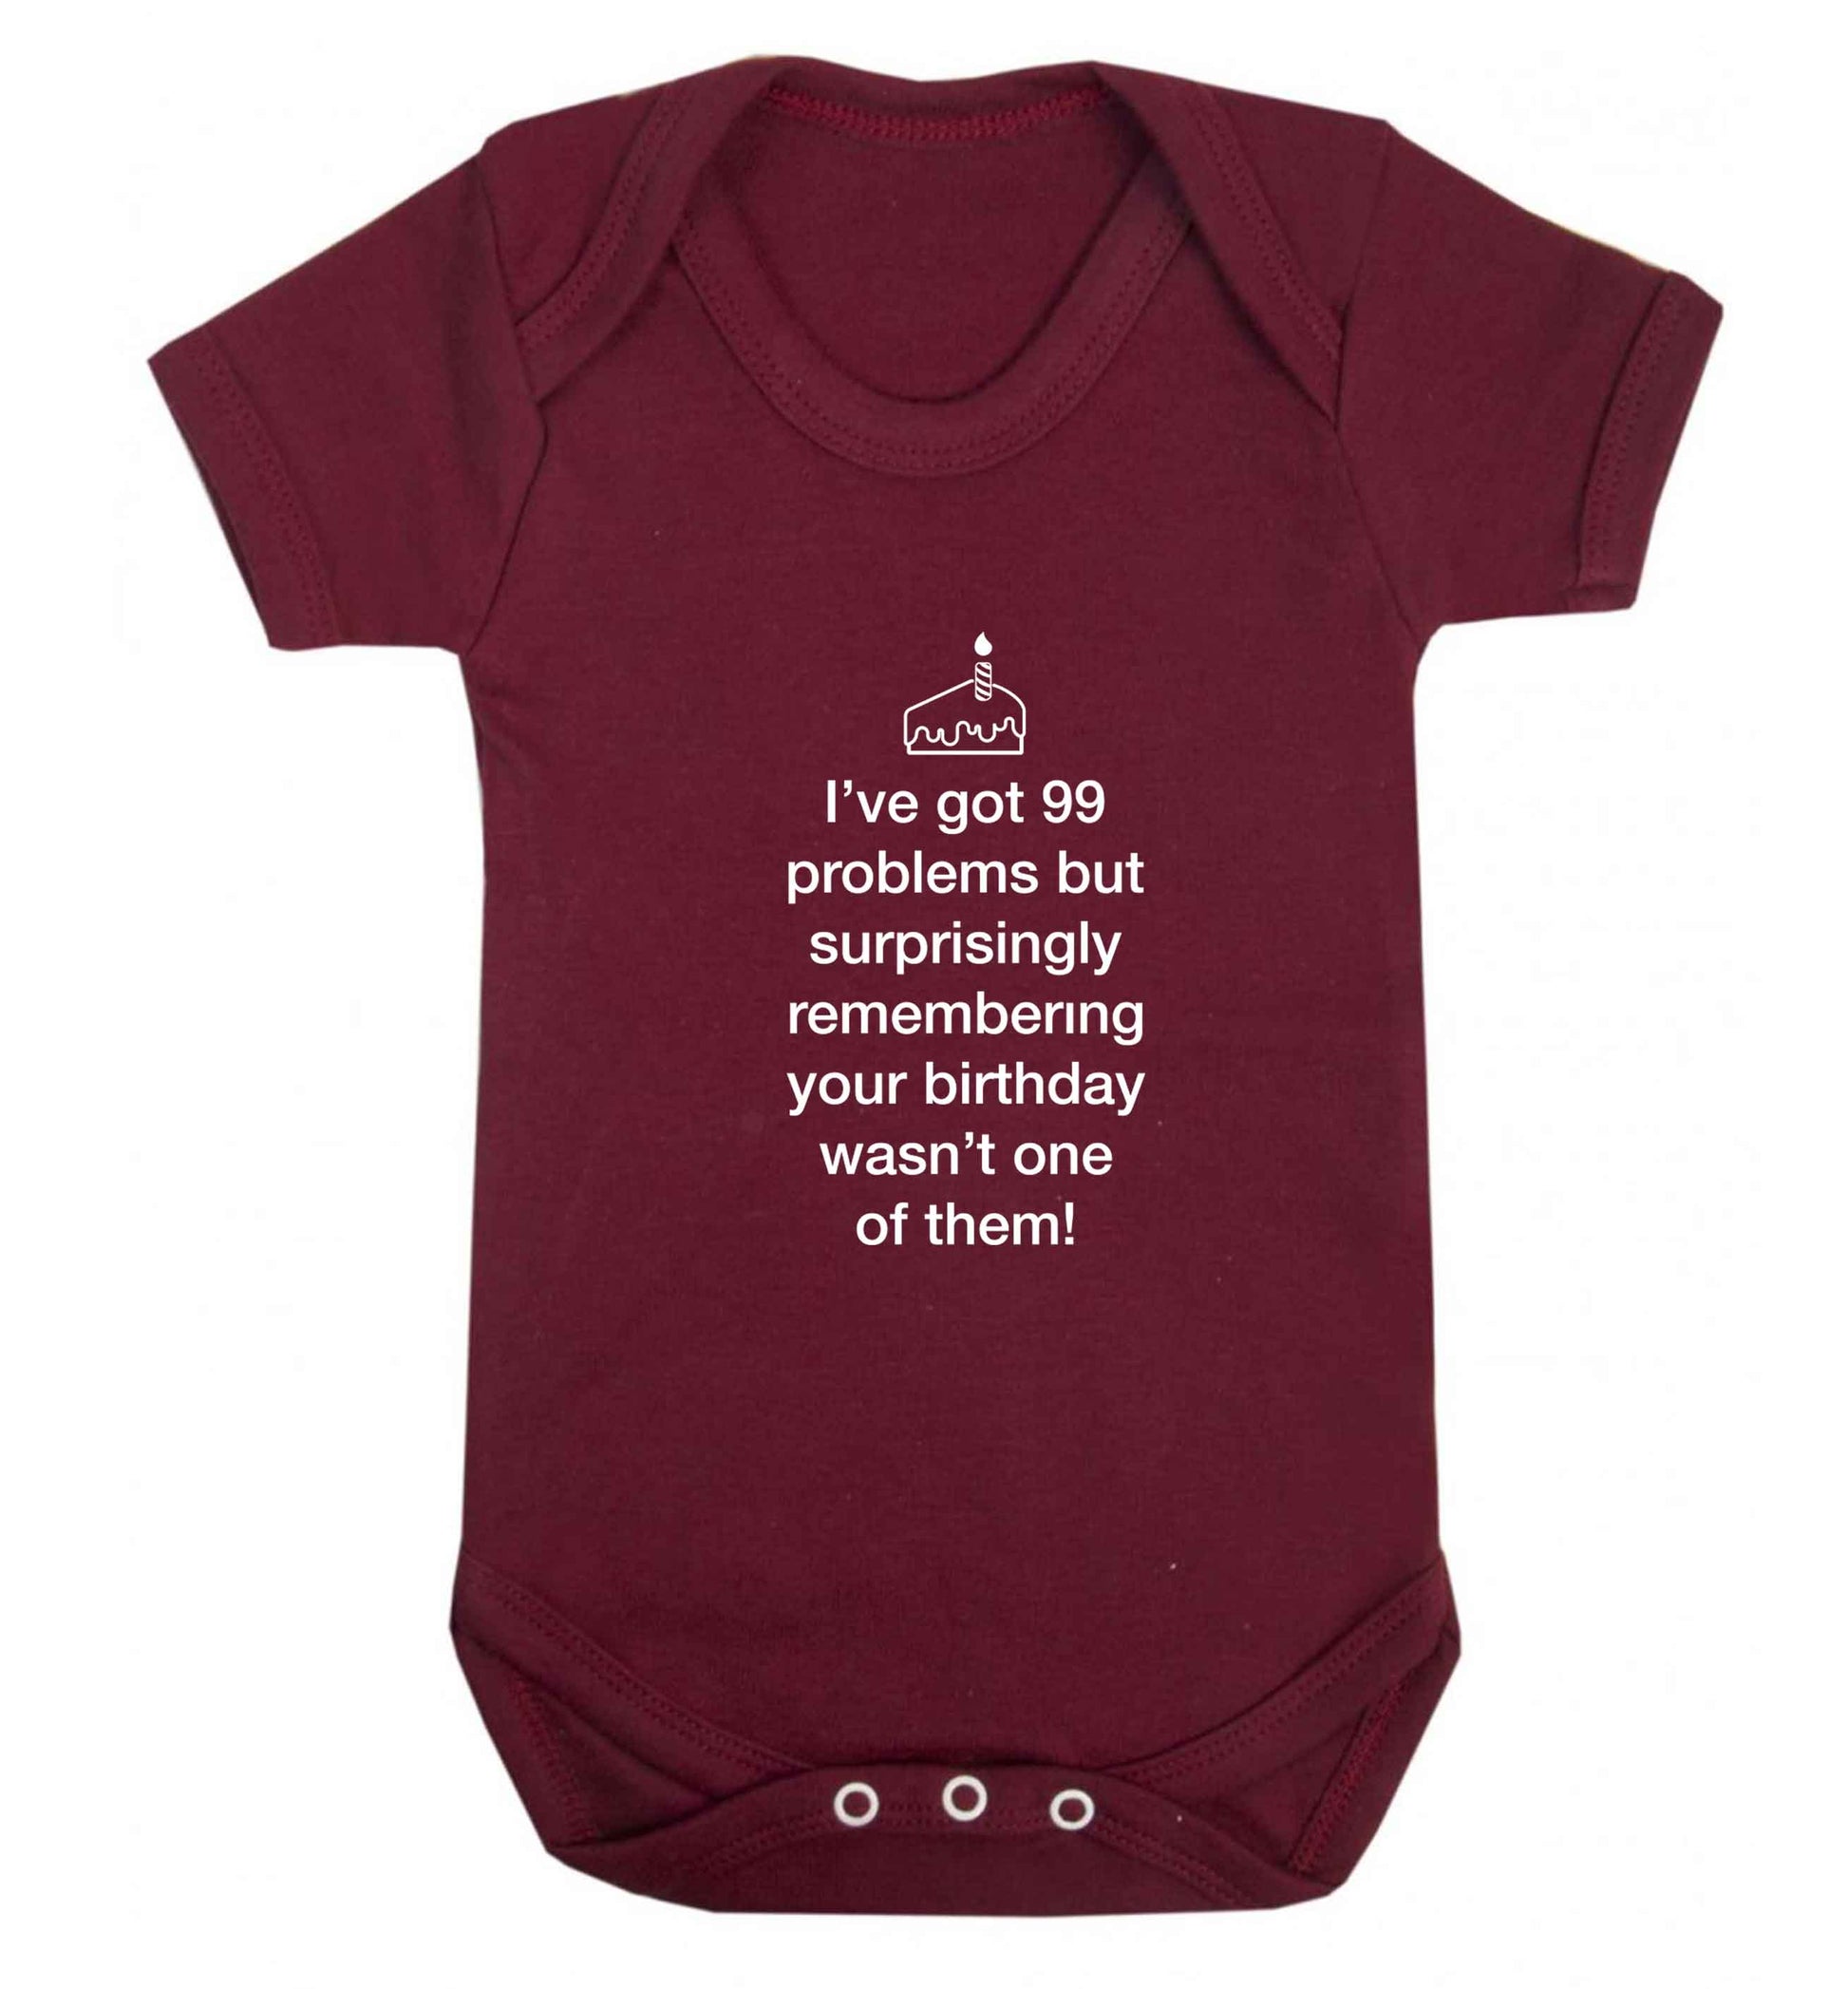 I've got 99 problems but surprisingly remembering your birthday wasn't one of them! baby vest maroon 18-24 months